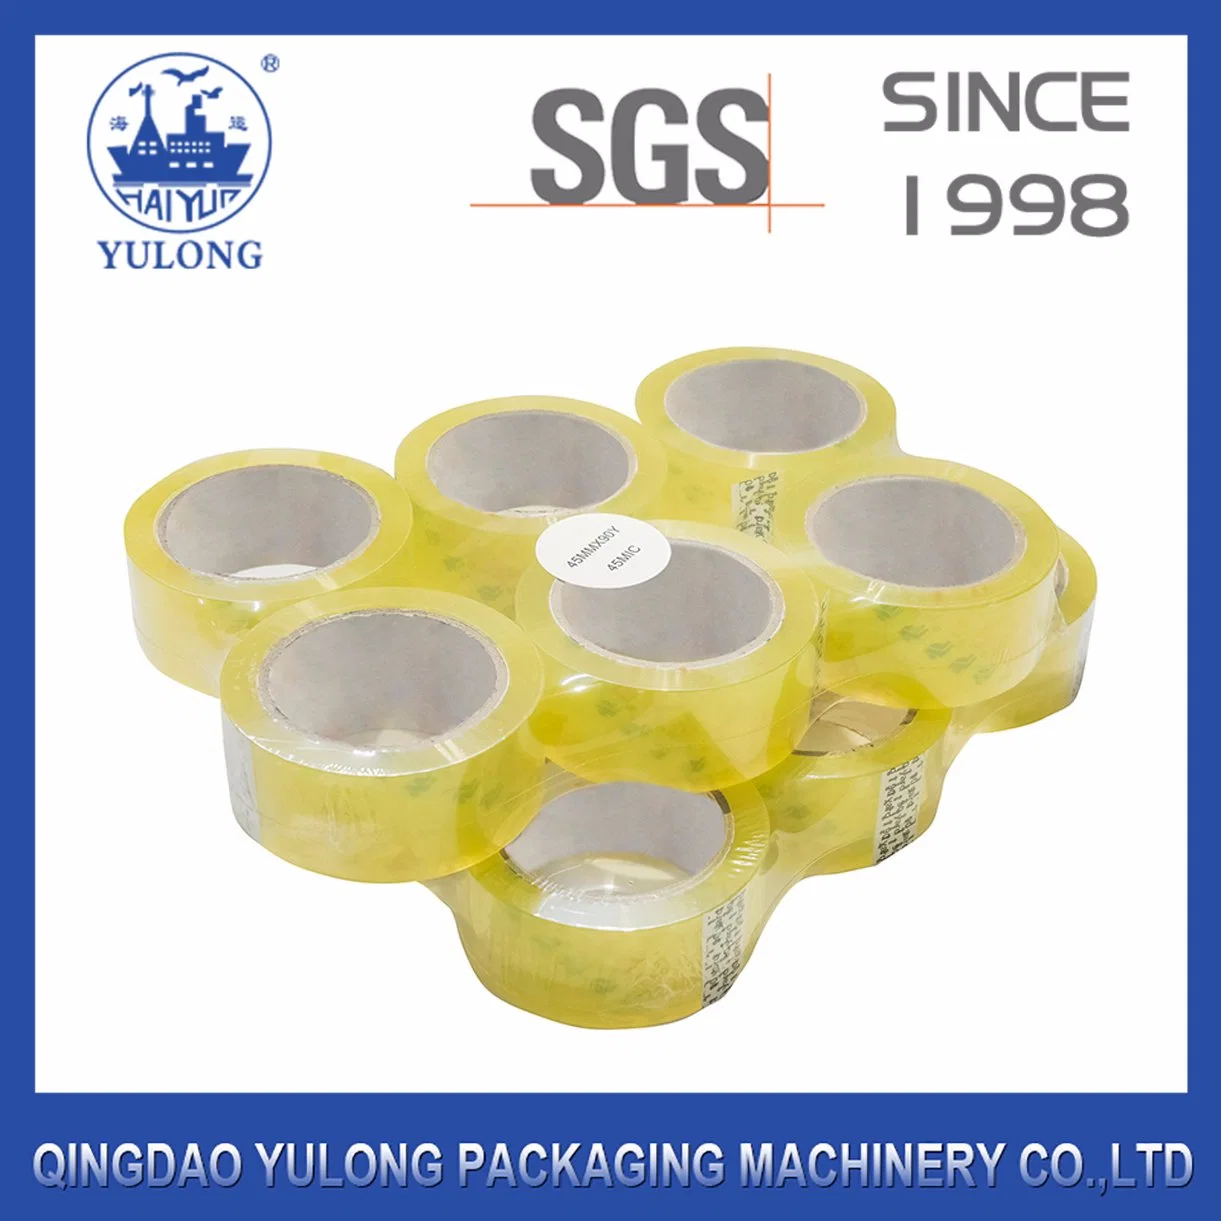 No Bubble/Packing/Stationery/ Adhesive /BOPP / Packaging Tape for Sealing Carton